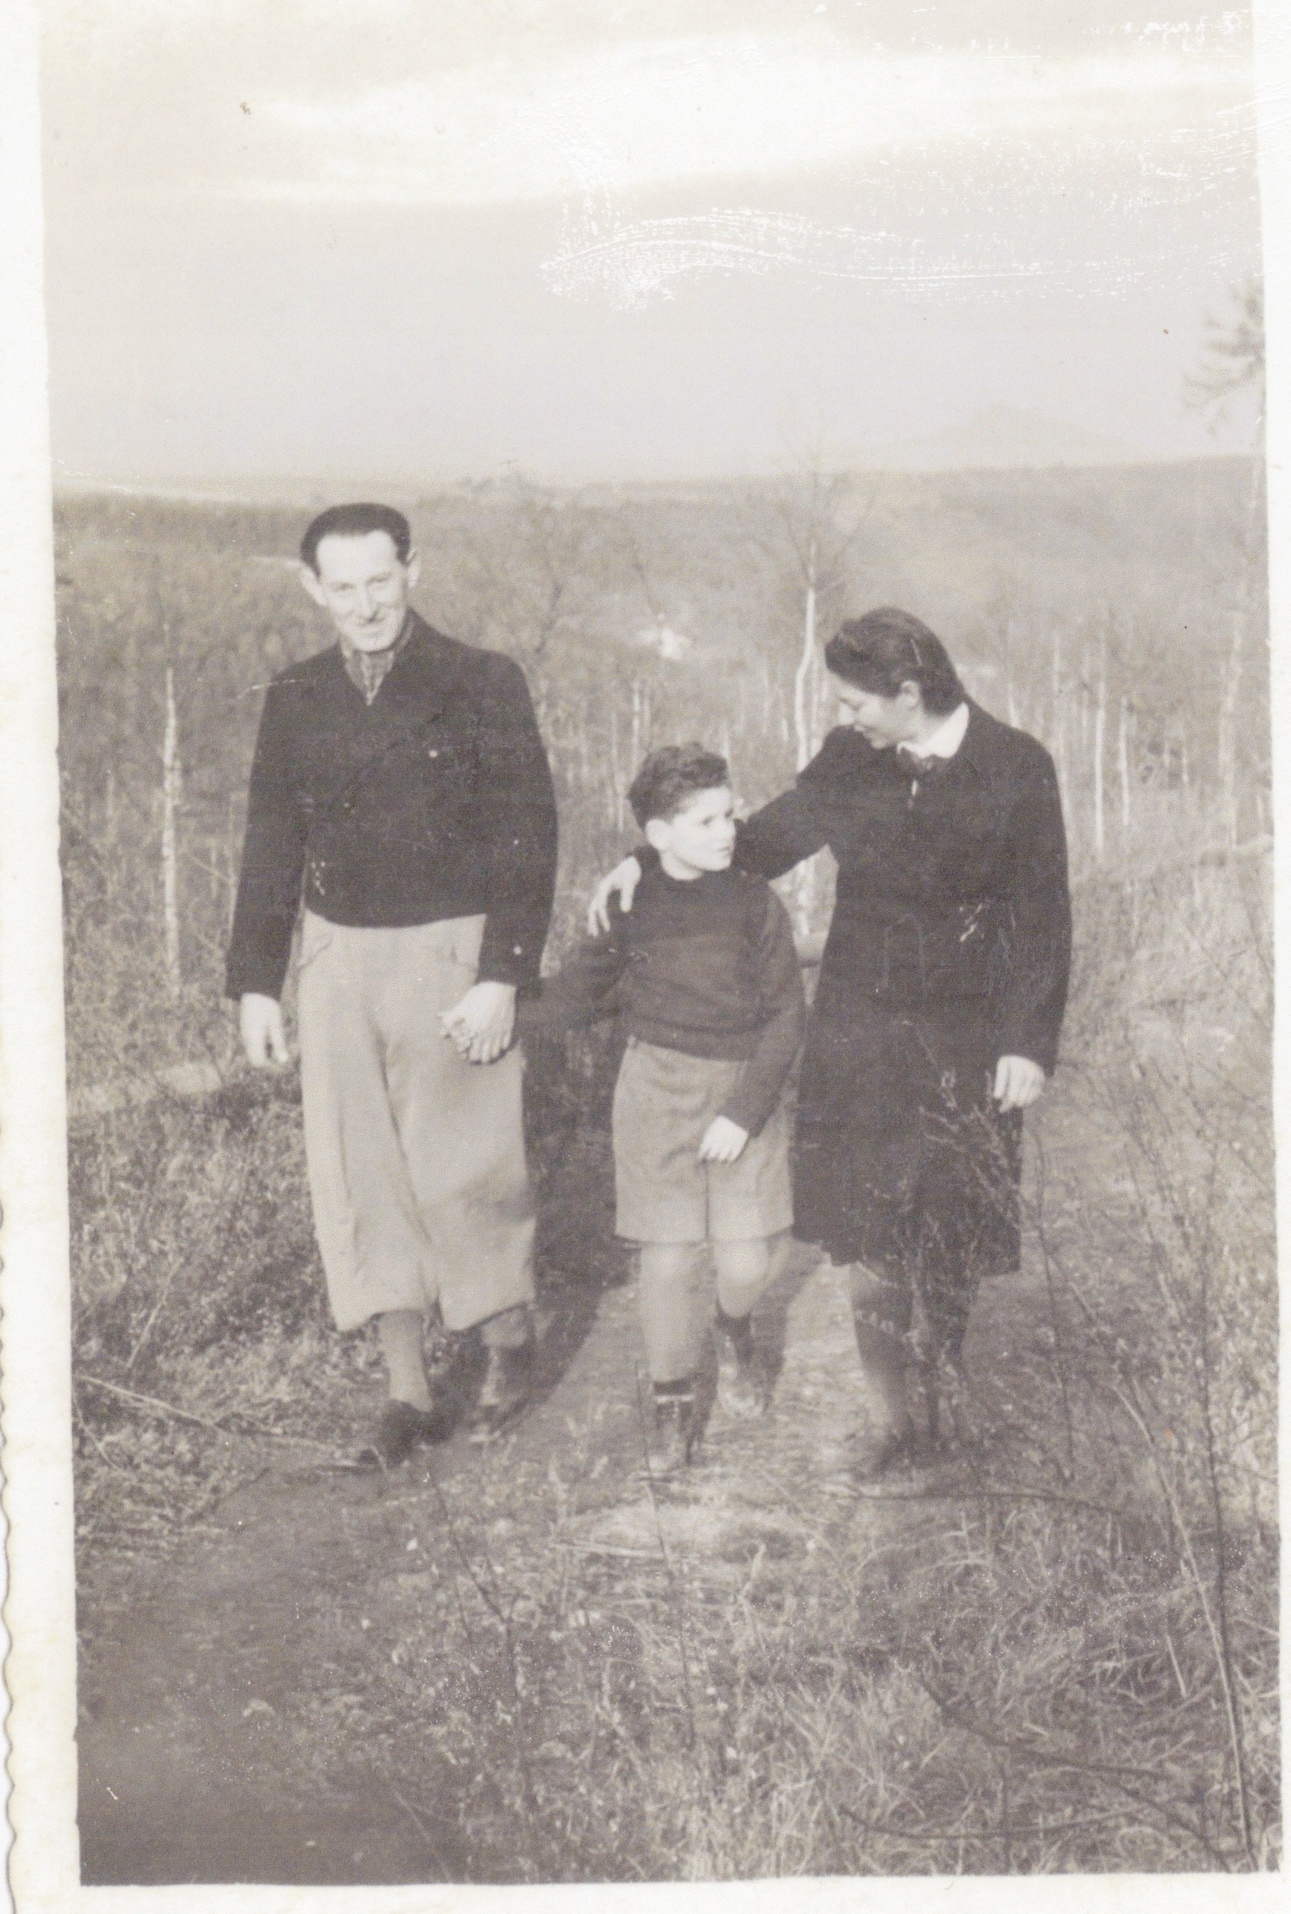 A photo of Paul and Kmaila Rosen walking with their son.